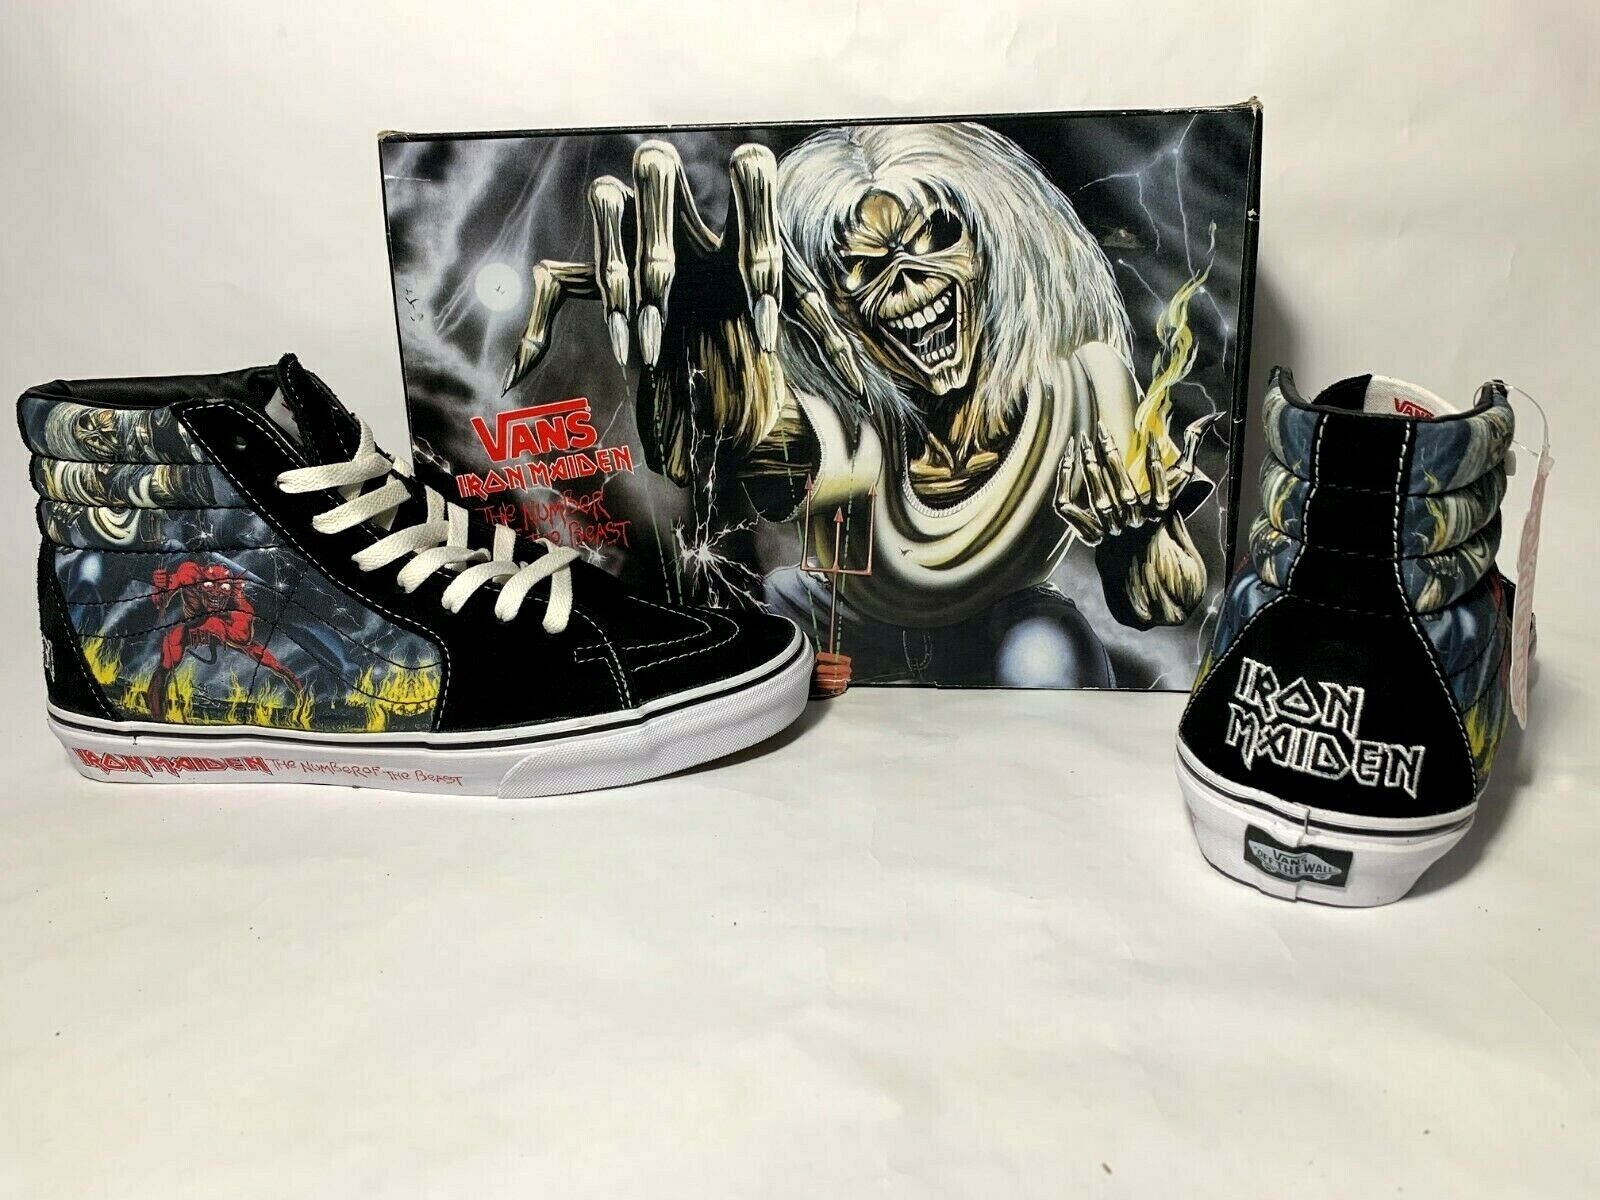 Vans X Iron Maiden (30th) NUMBER OF THE BEAST/ SZ.9.5/ VN-0TS9IM3 VANS Vans X Iron Maiden (Number of the beast)